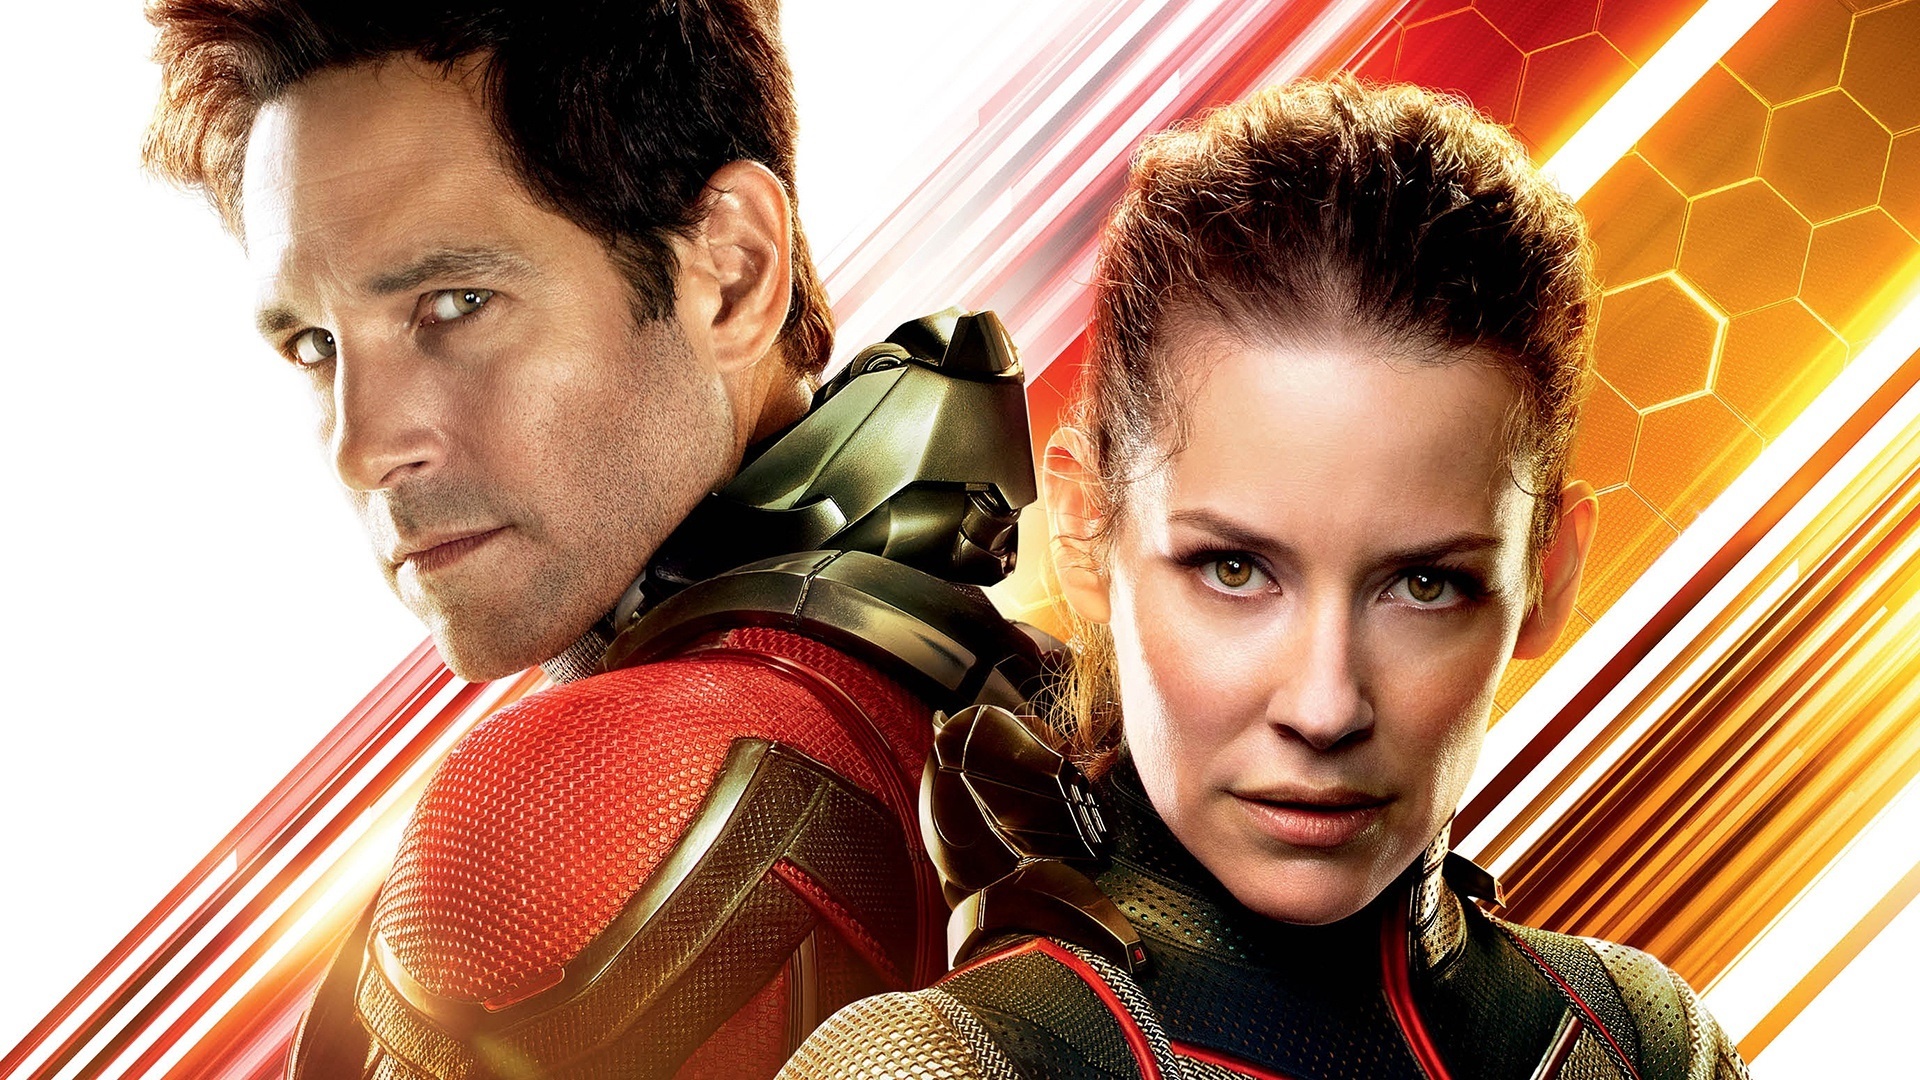 Ant-Man and Wasp wallpaper, Posted by Sarah Walker, Marvel movie, Superhero duo, 1920x1080 Full HD Desktop